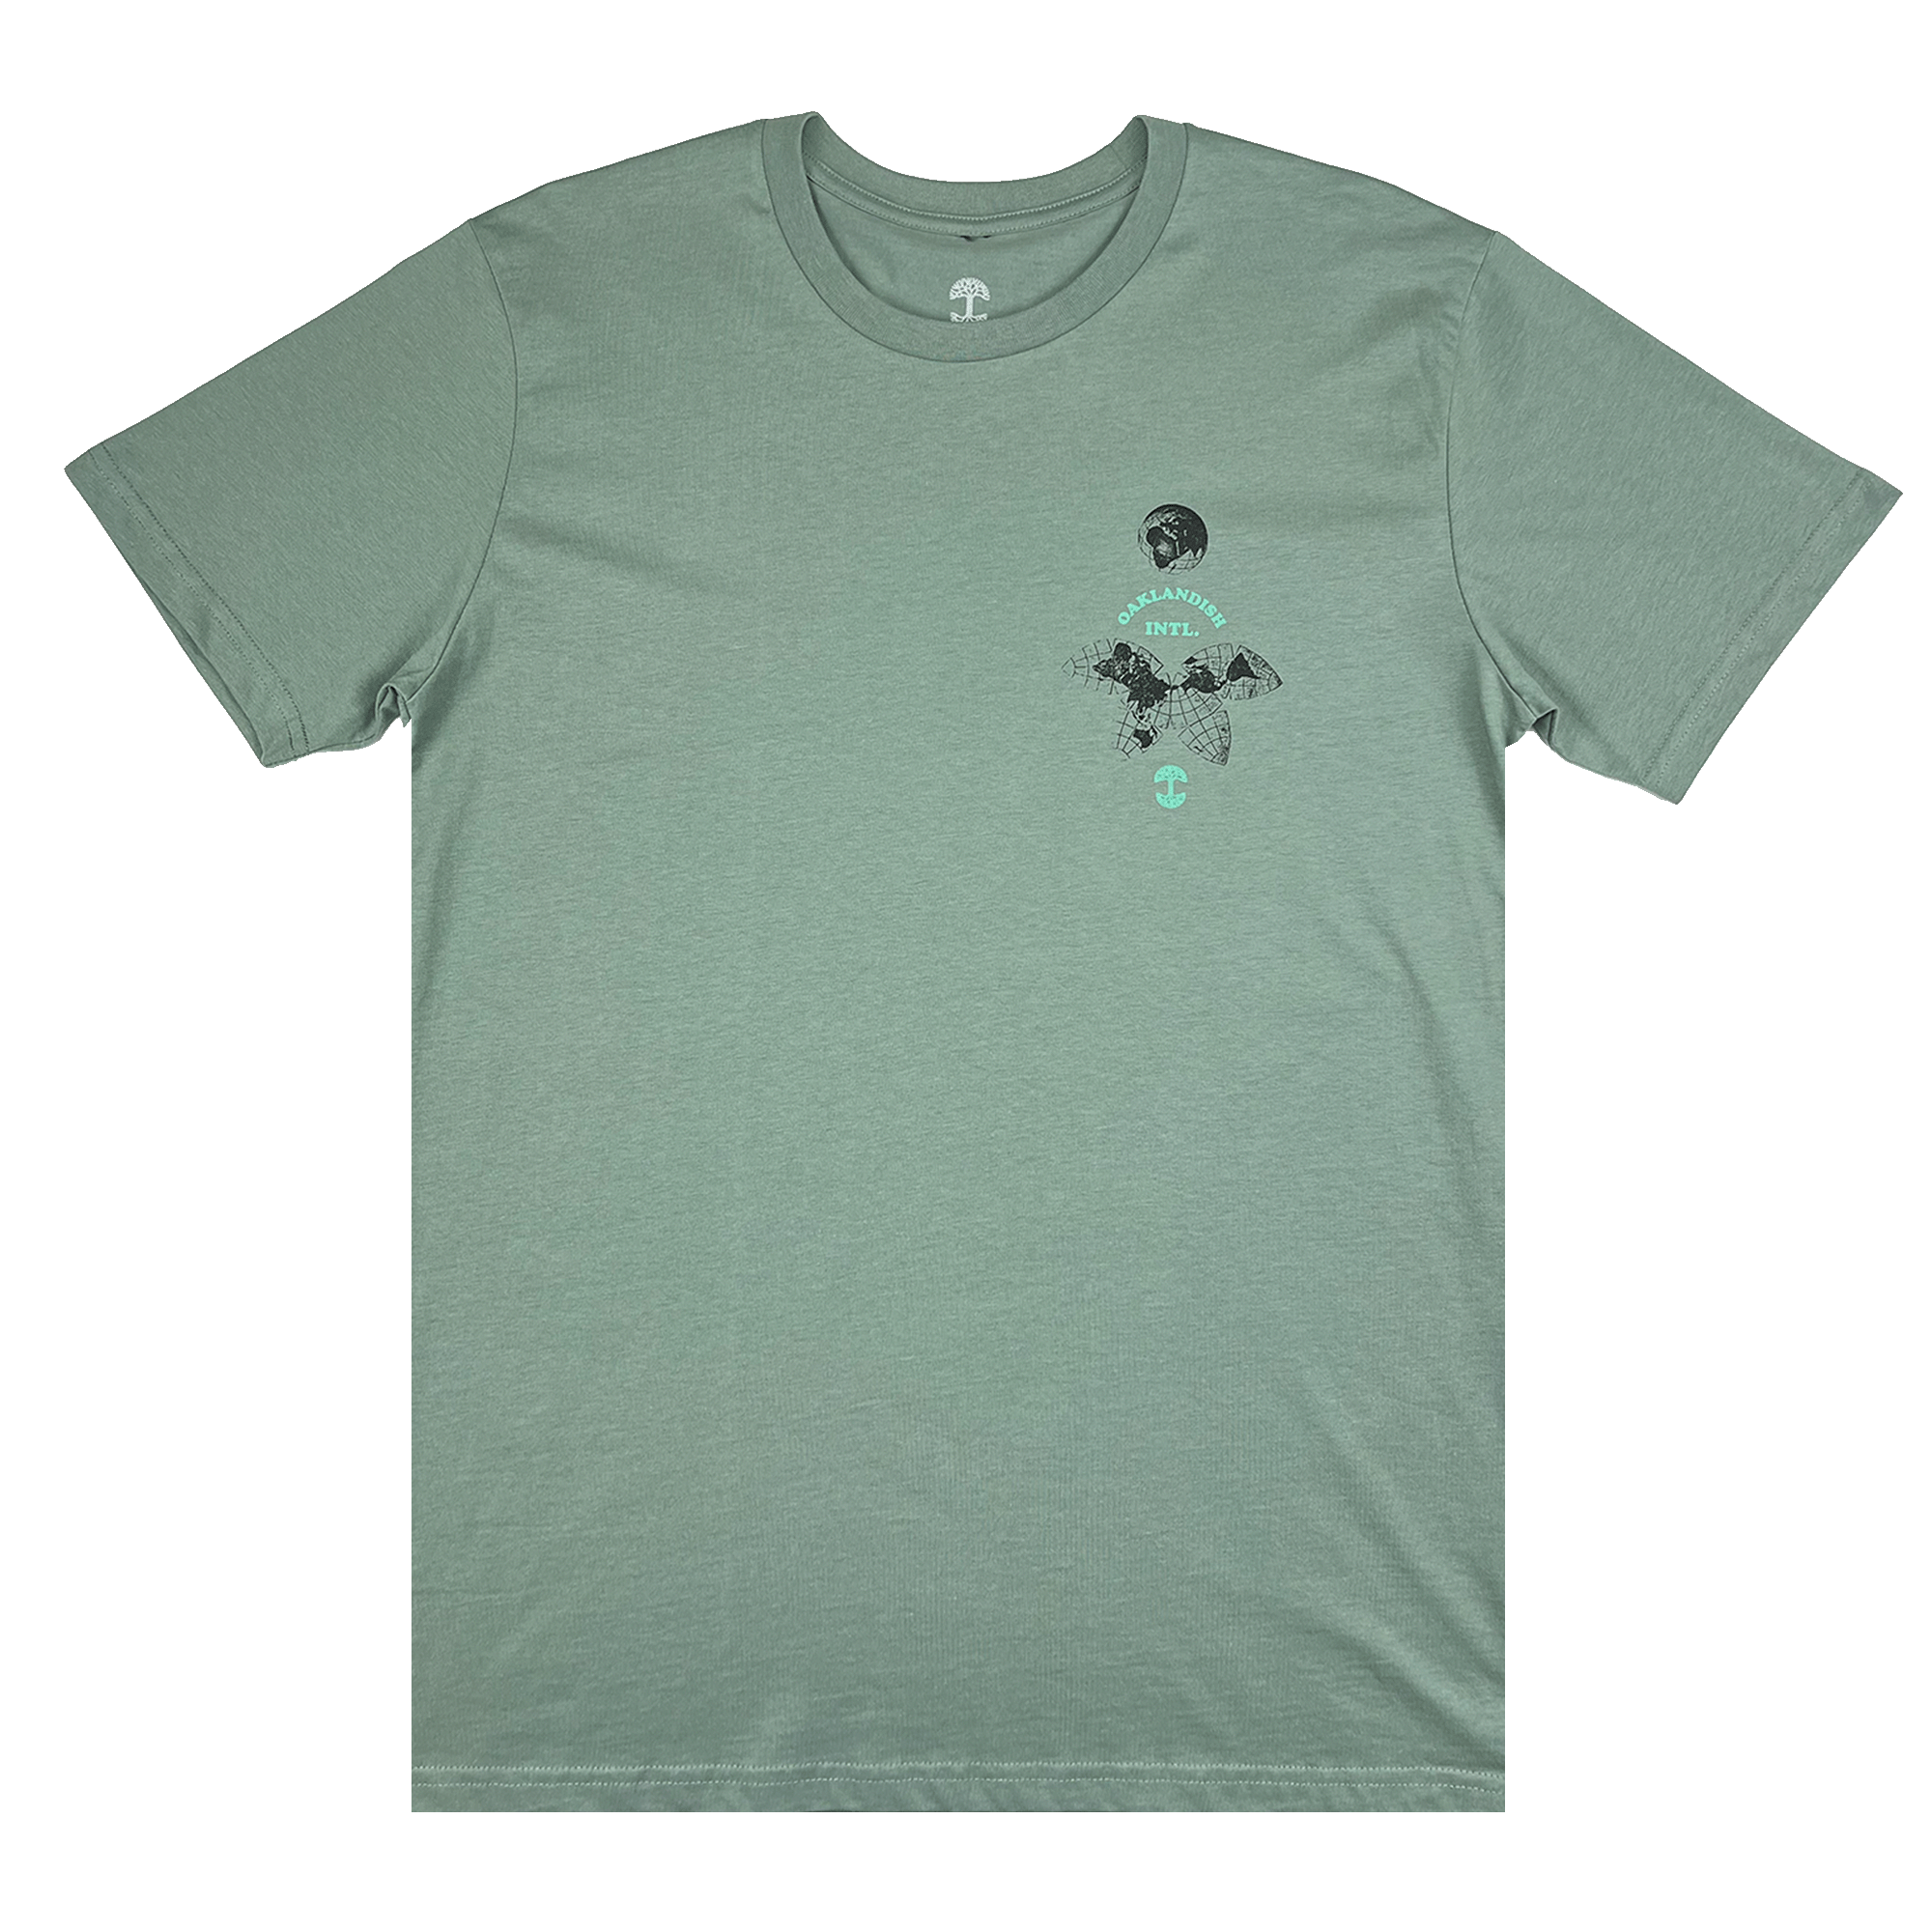 The front side of a sage green t-shirt with a small Oakland International graphic and Oaklandish tree logo on the upper chest.